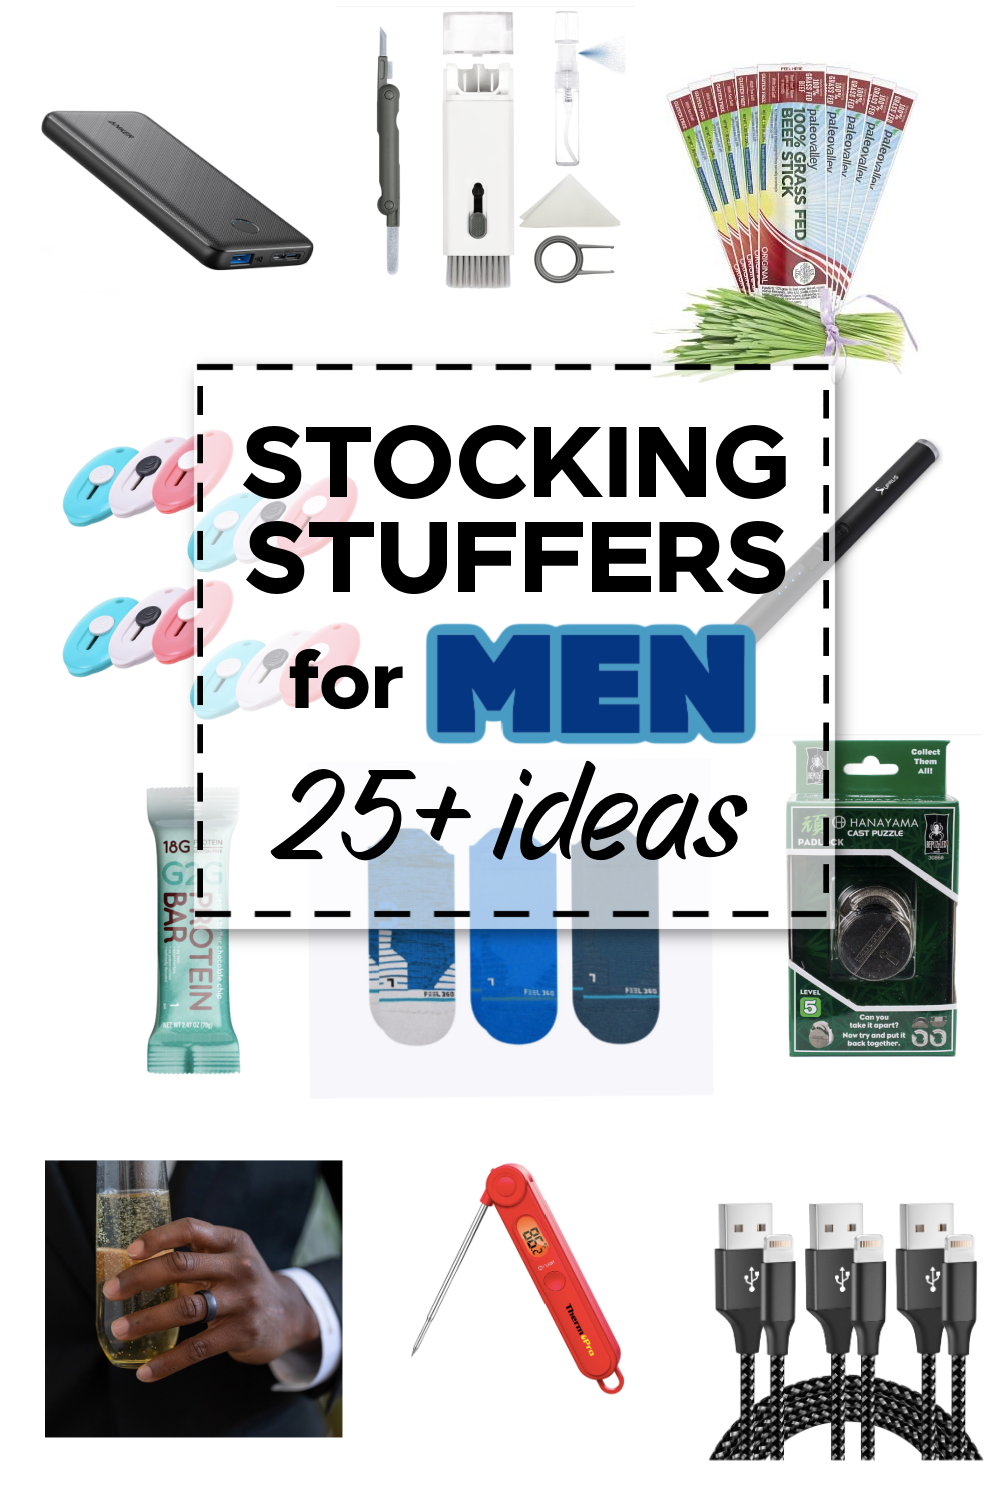 https://everyday-reading.com/wp-content/uploads/2022/11/Stocking-Stuffers-MEN-POI.png